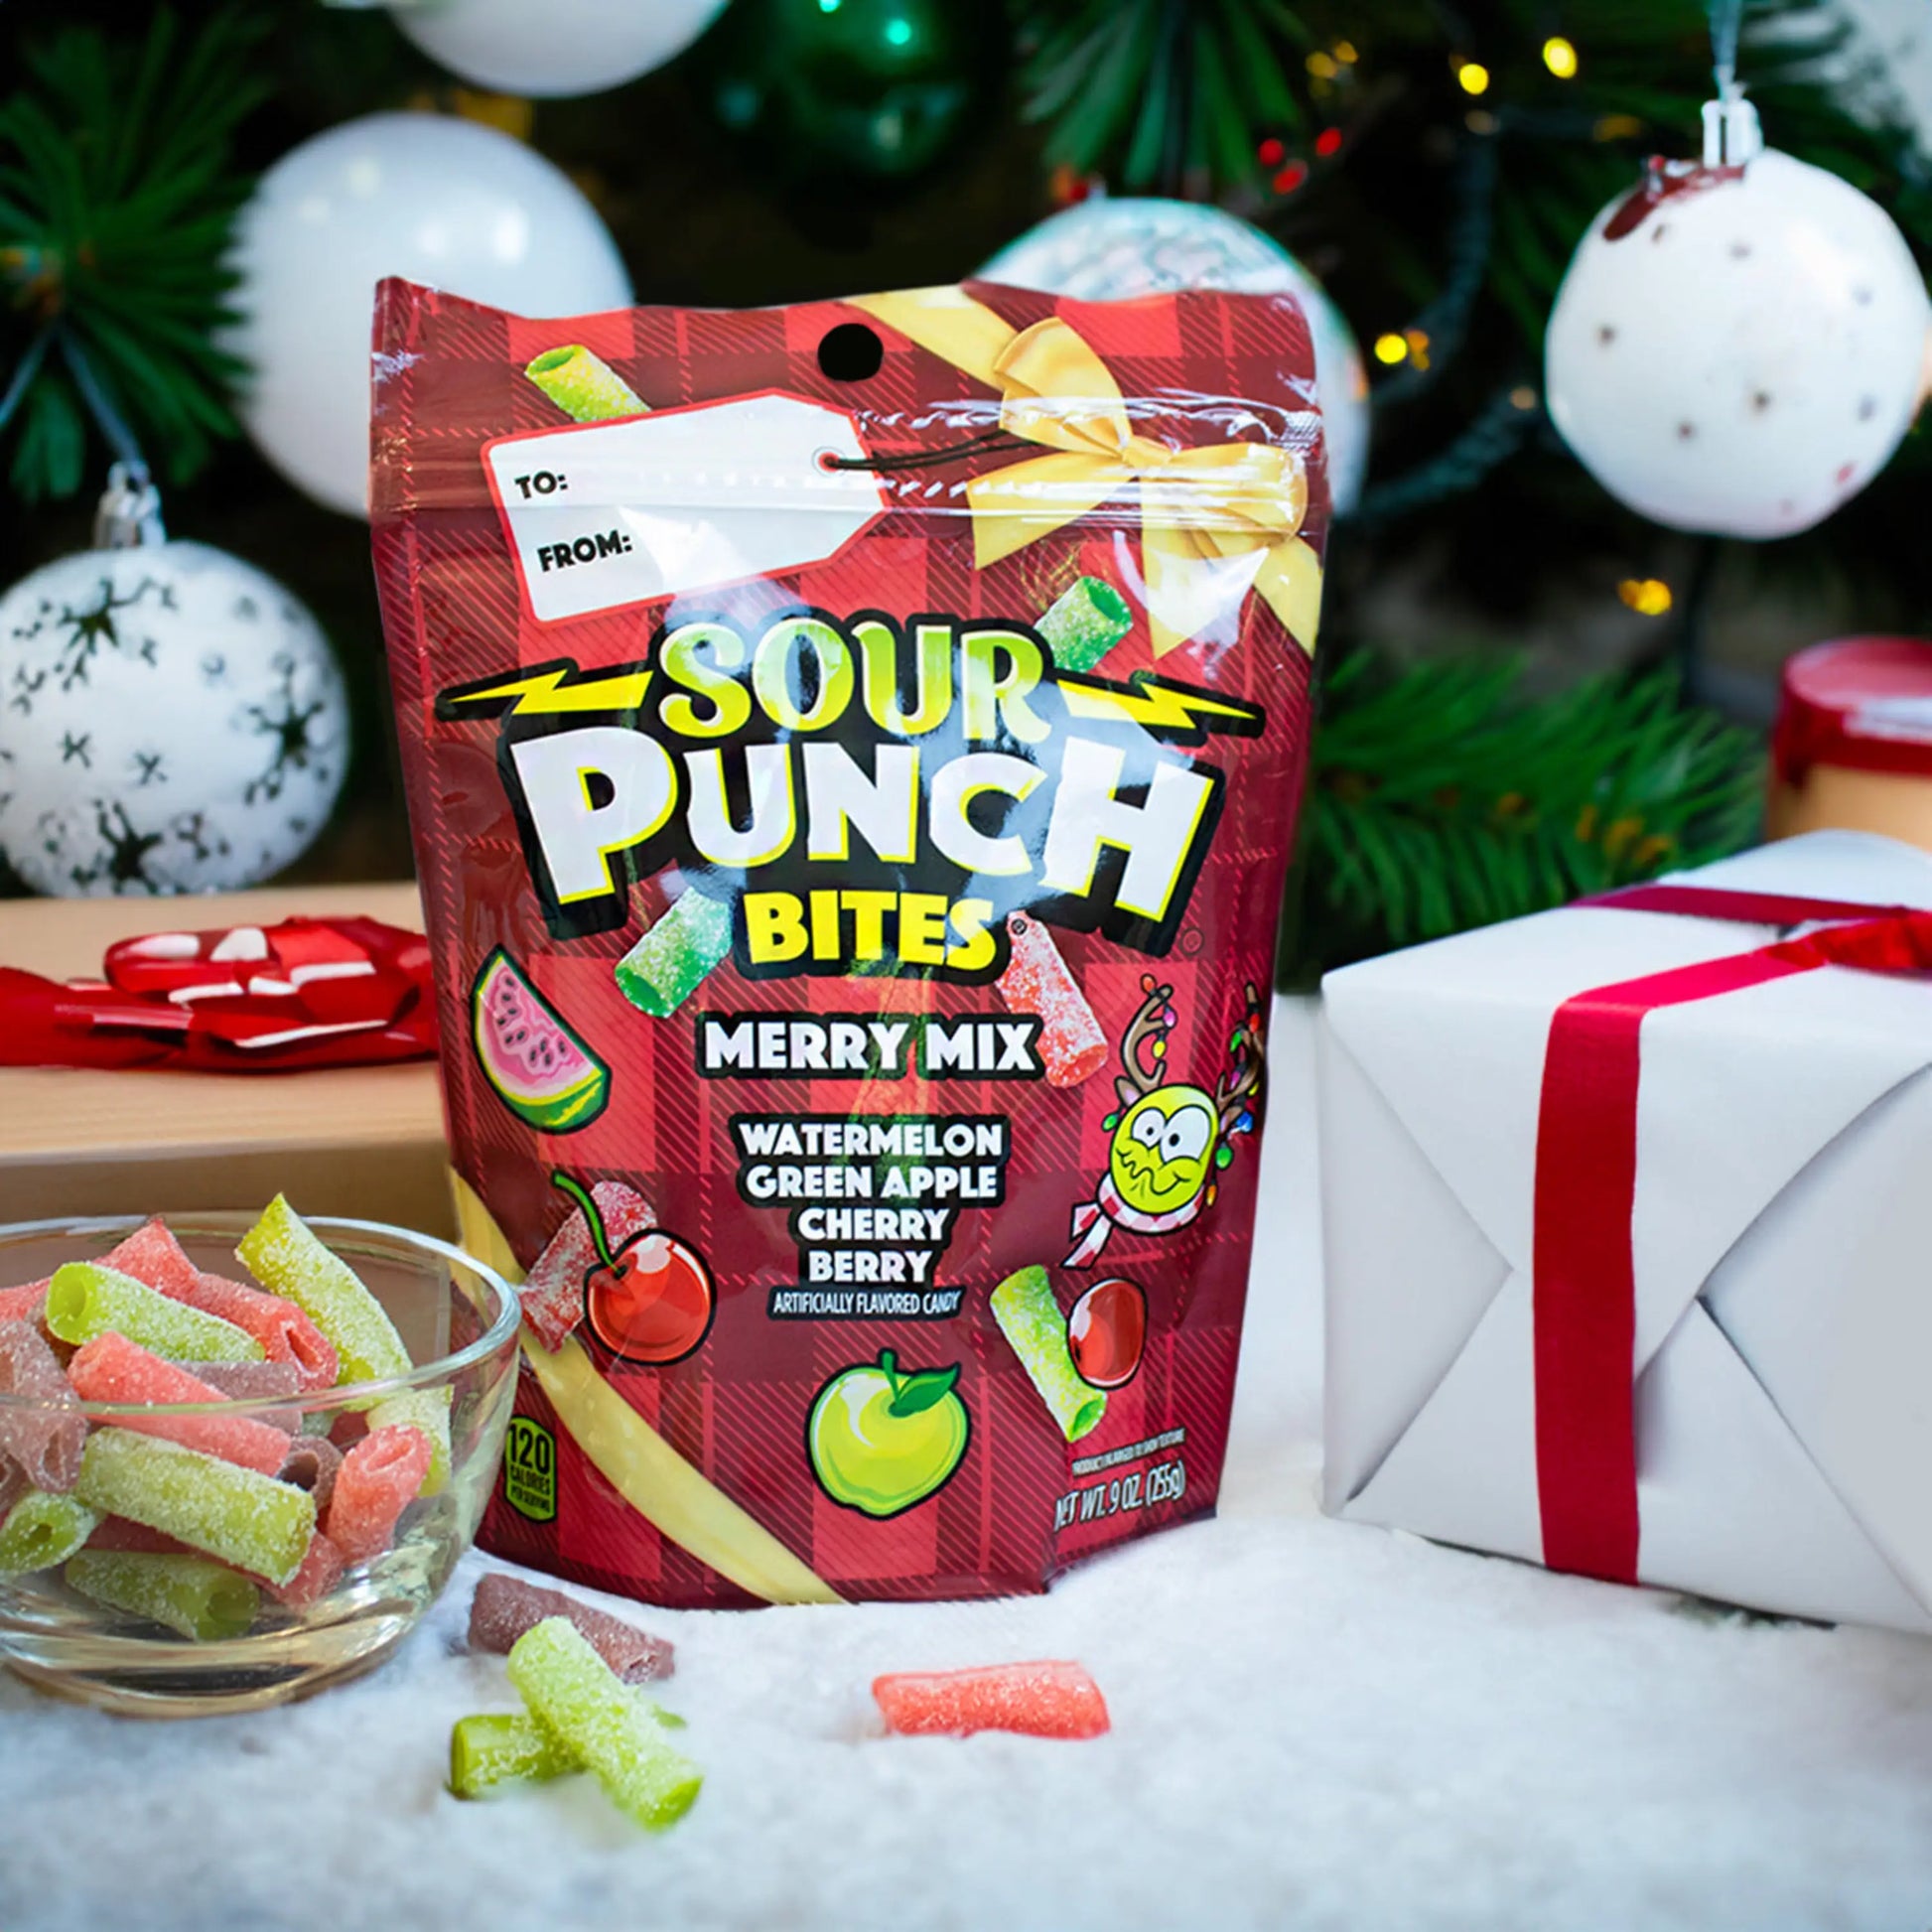 SOUR PUNCH Merry Mix Bites holiday candy next to gifts and decorated tree